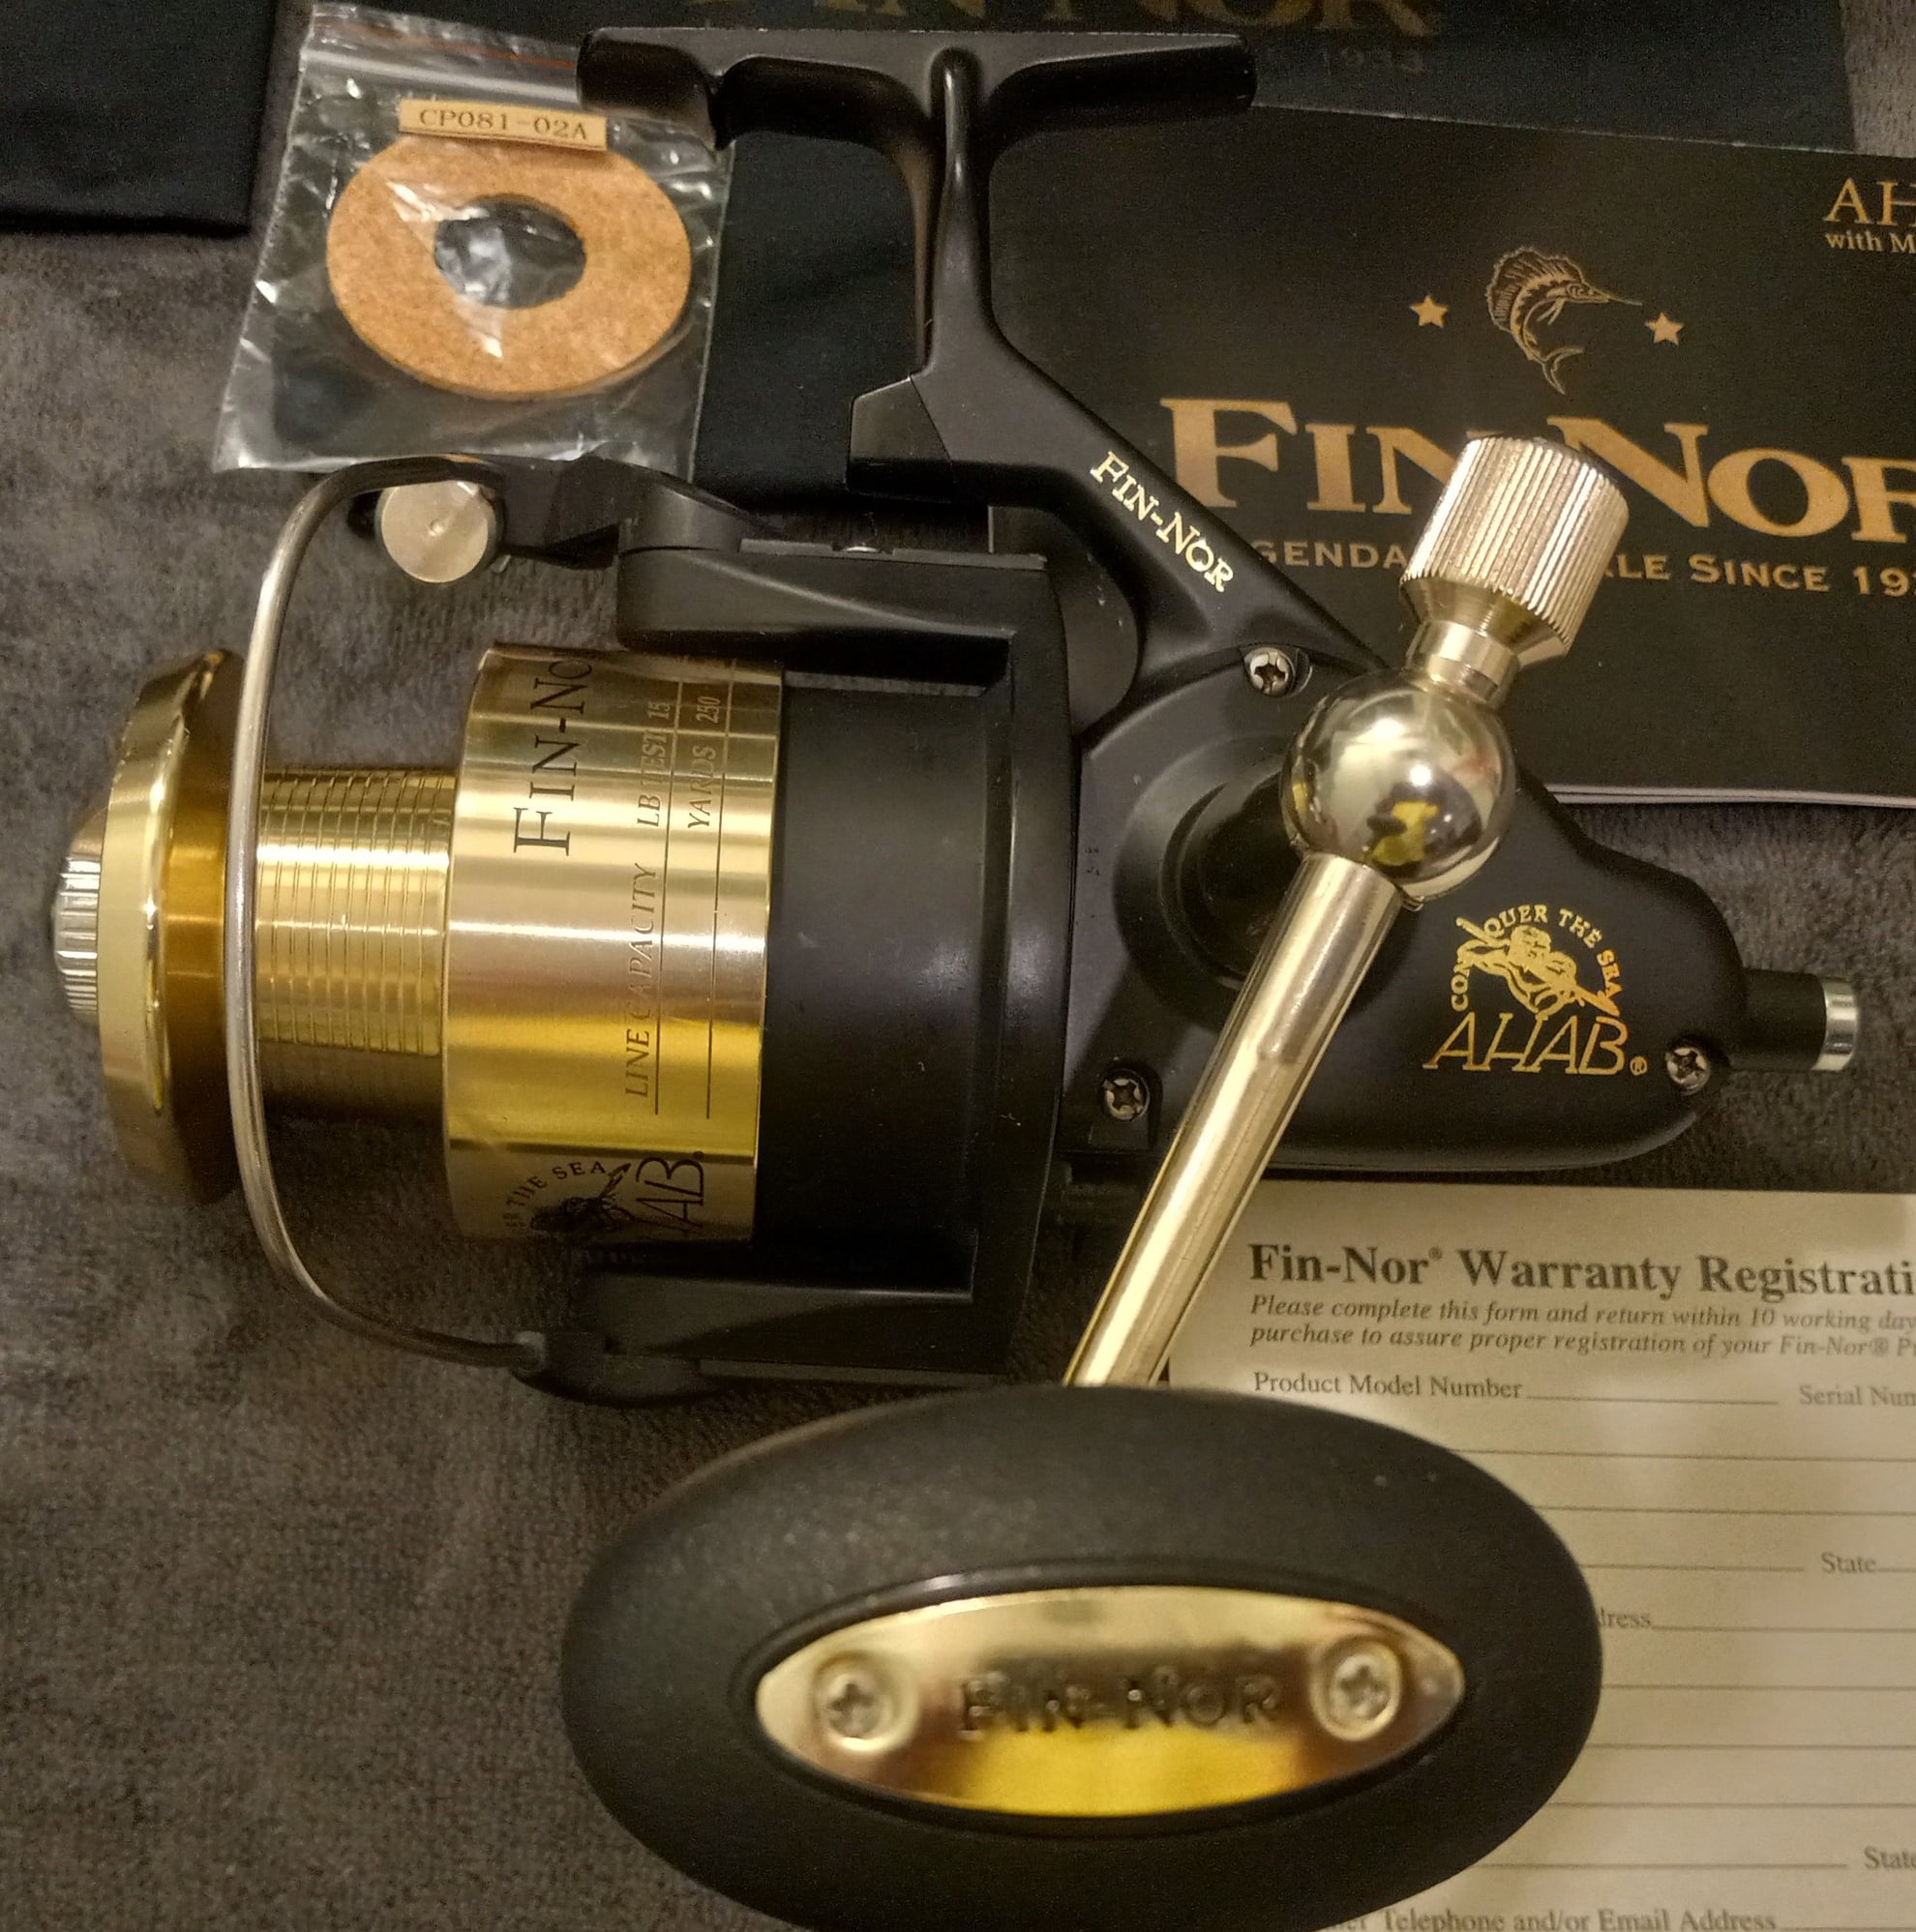 Shimano surf reel - The Hull Truth - Boating and Fishing Forum